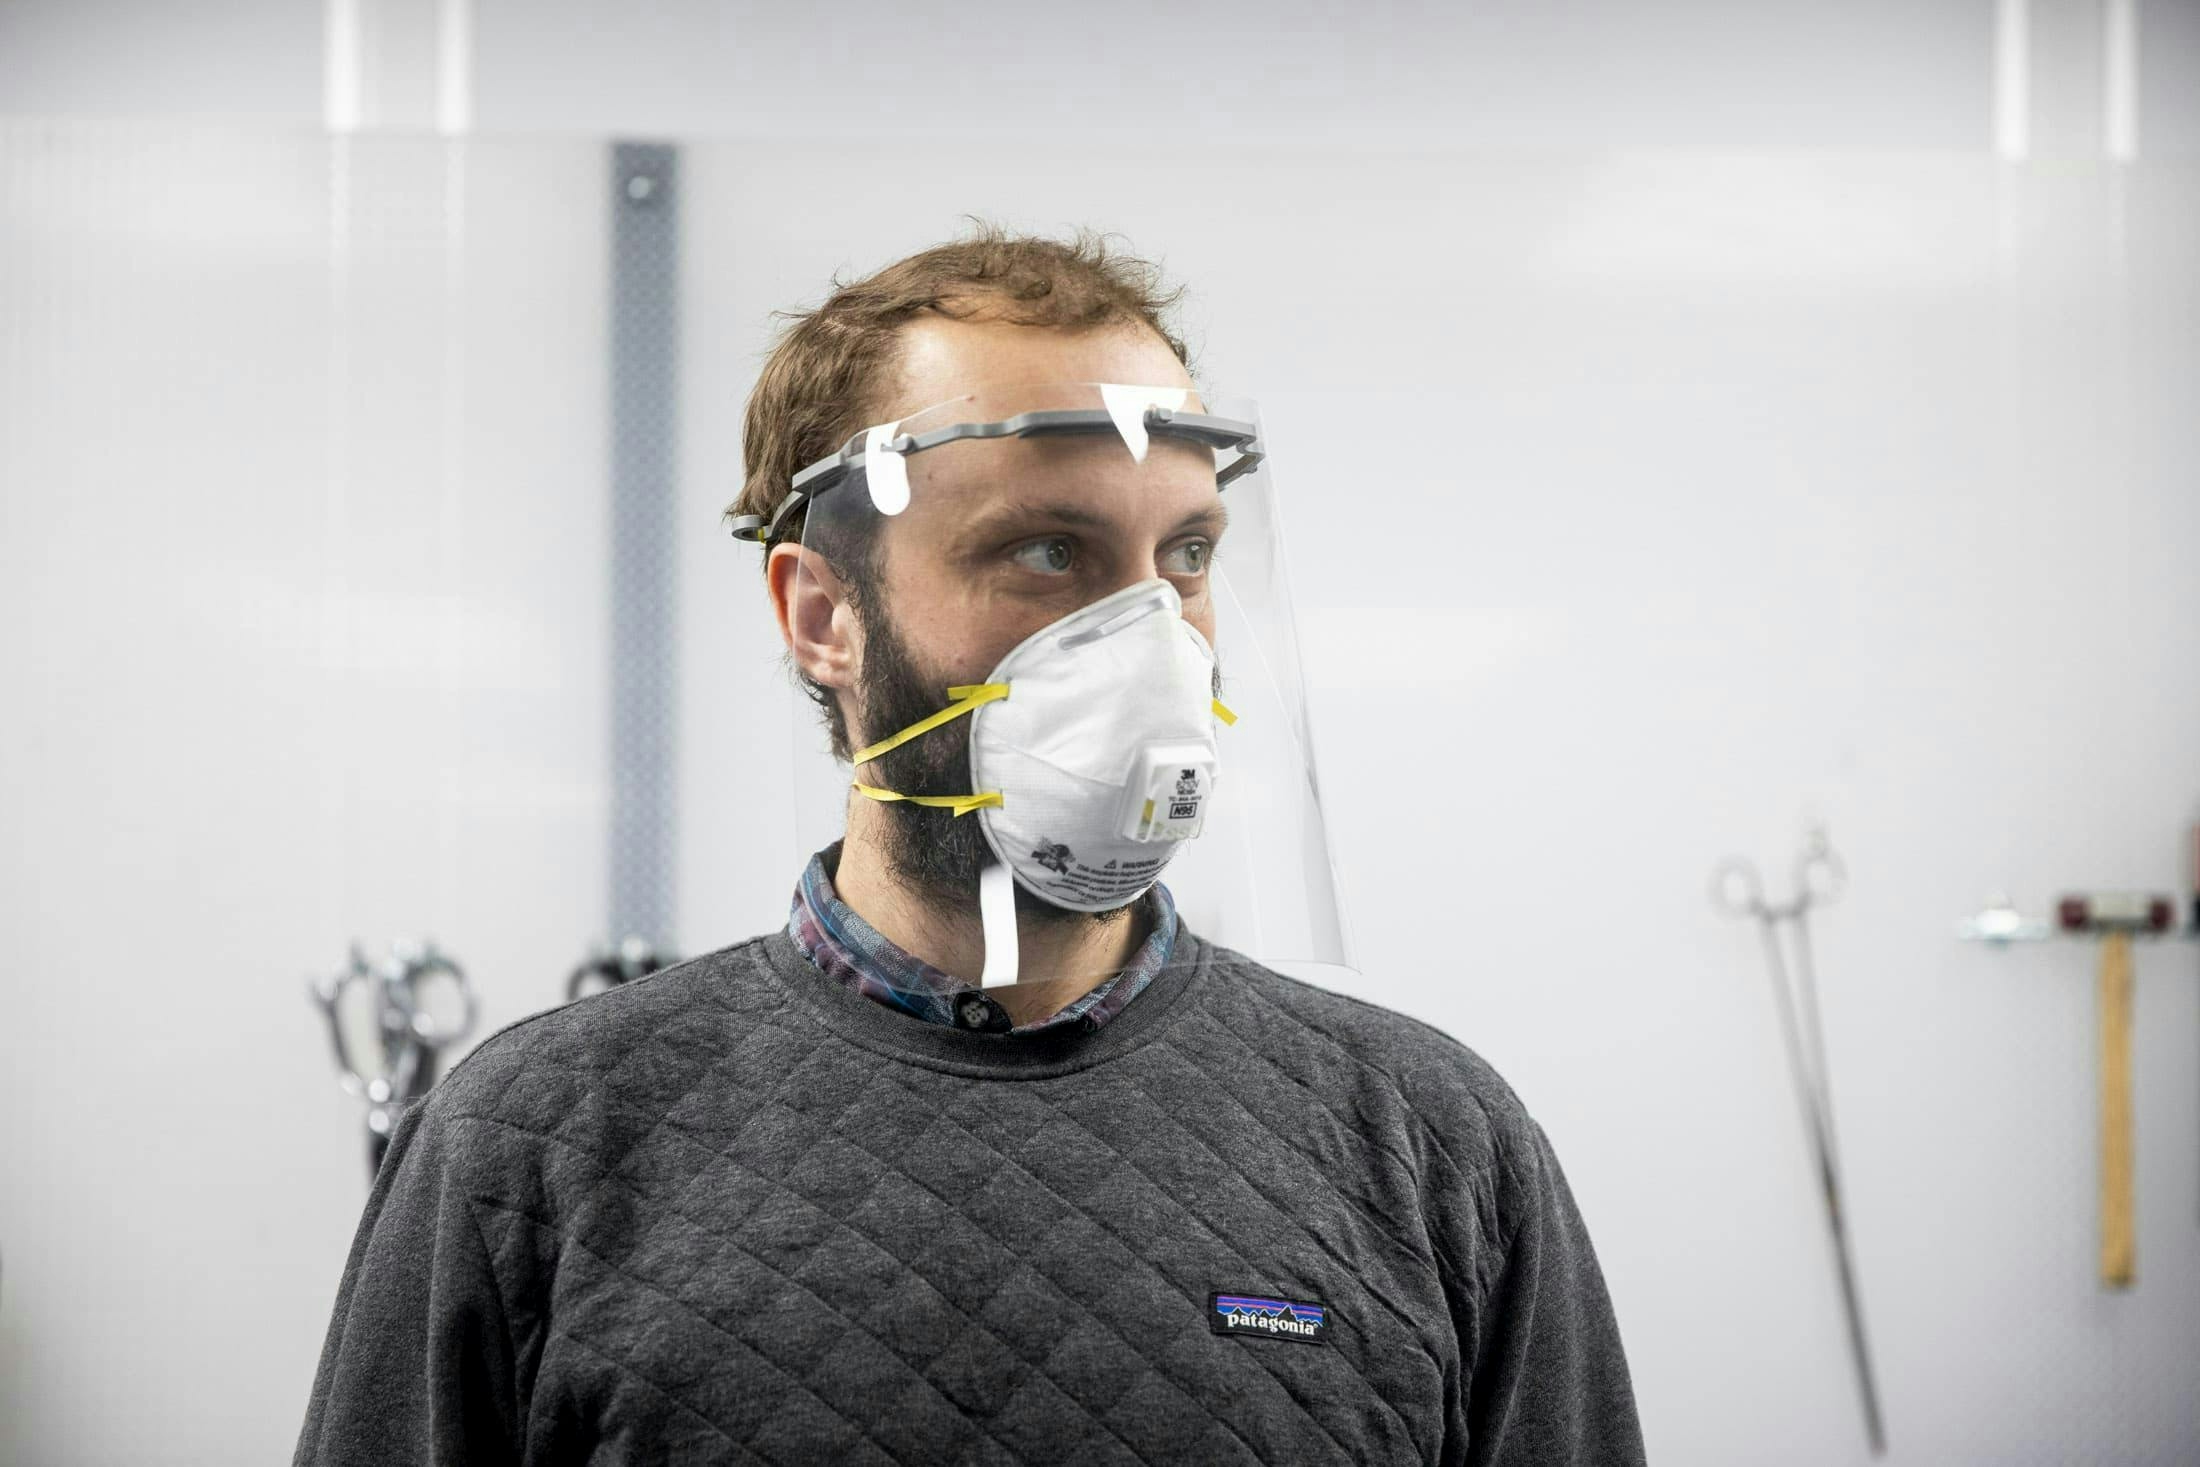 Former Santa Cruz Engineer (now project manager) Zach Wick wearing an N-95 Face mask and a face shield